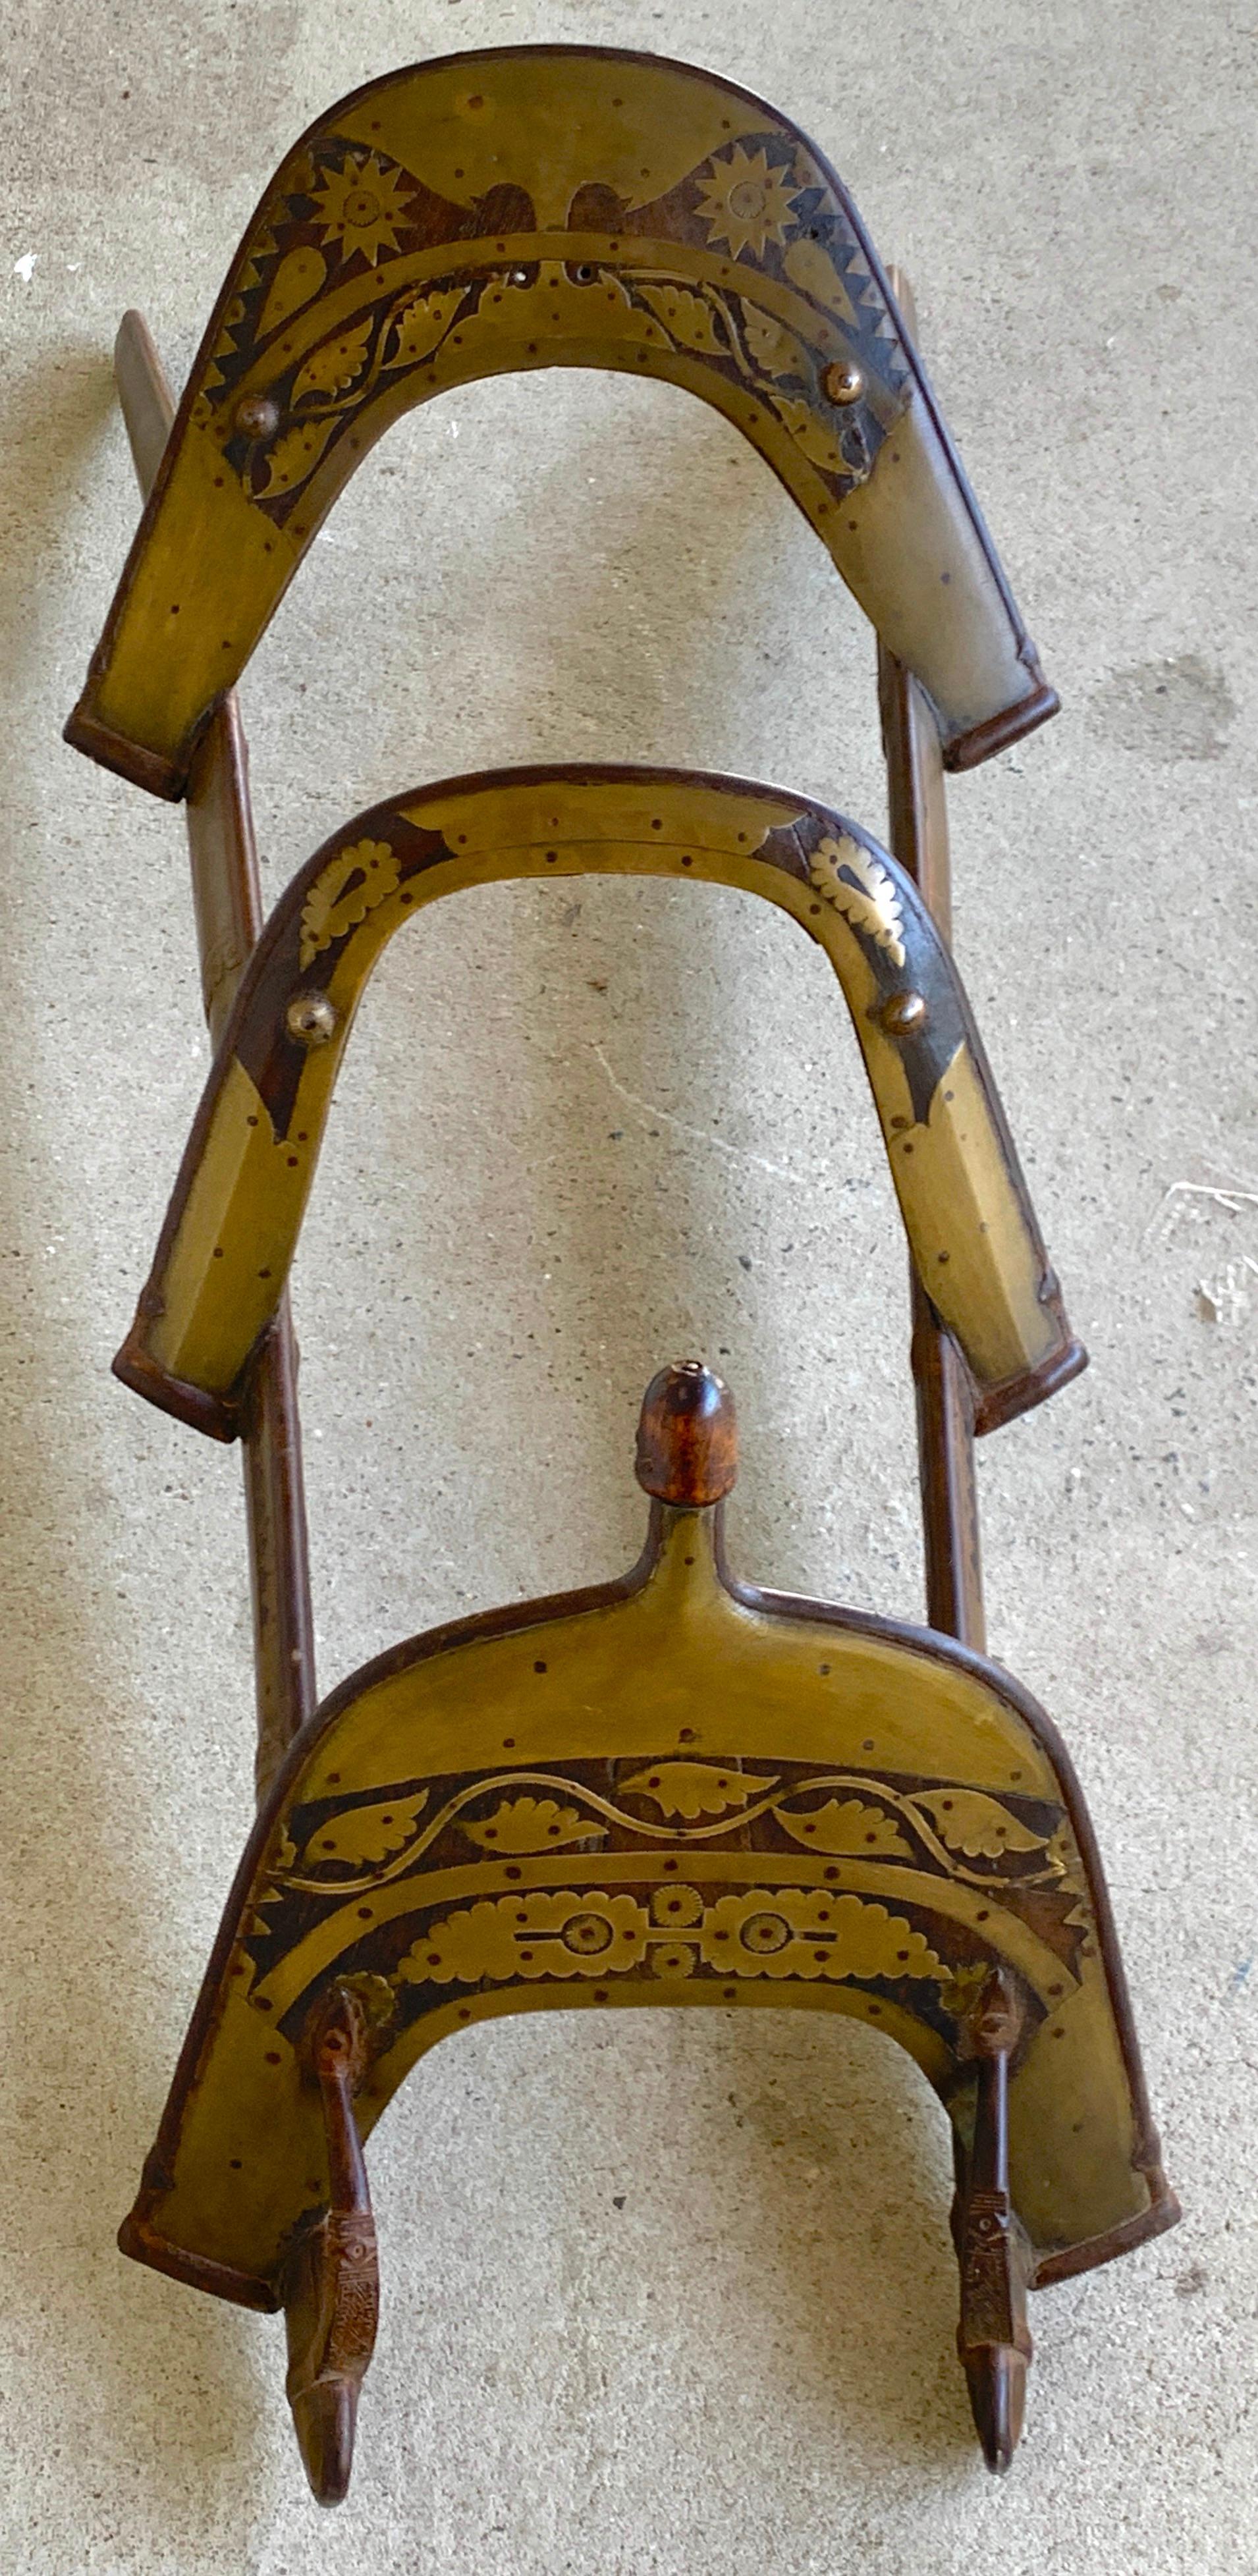 Moorish Brass inlaid camel saddle /towel rack 
The finest example, heavily inlaid with brass, possibly originally an officers or wealthy persons saddle. 
Can be easily mounted and used as a towel or clothing rack.
 